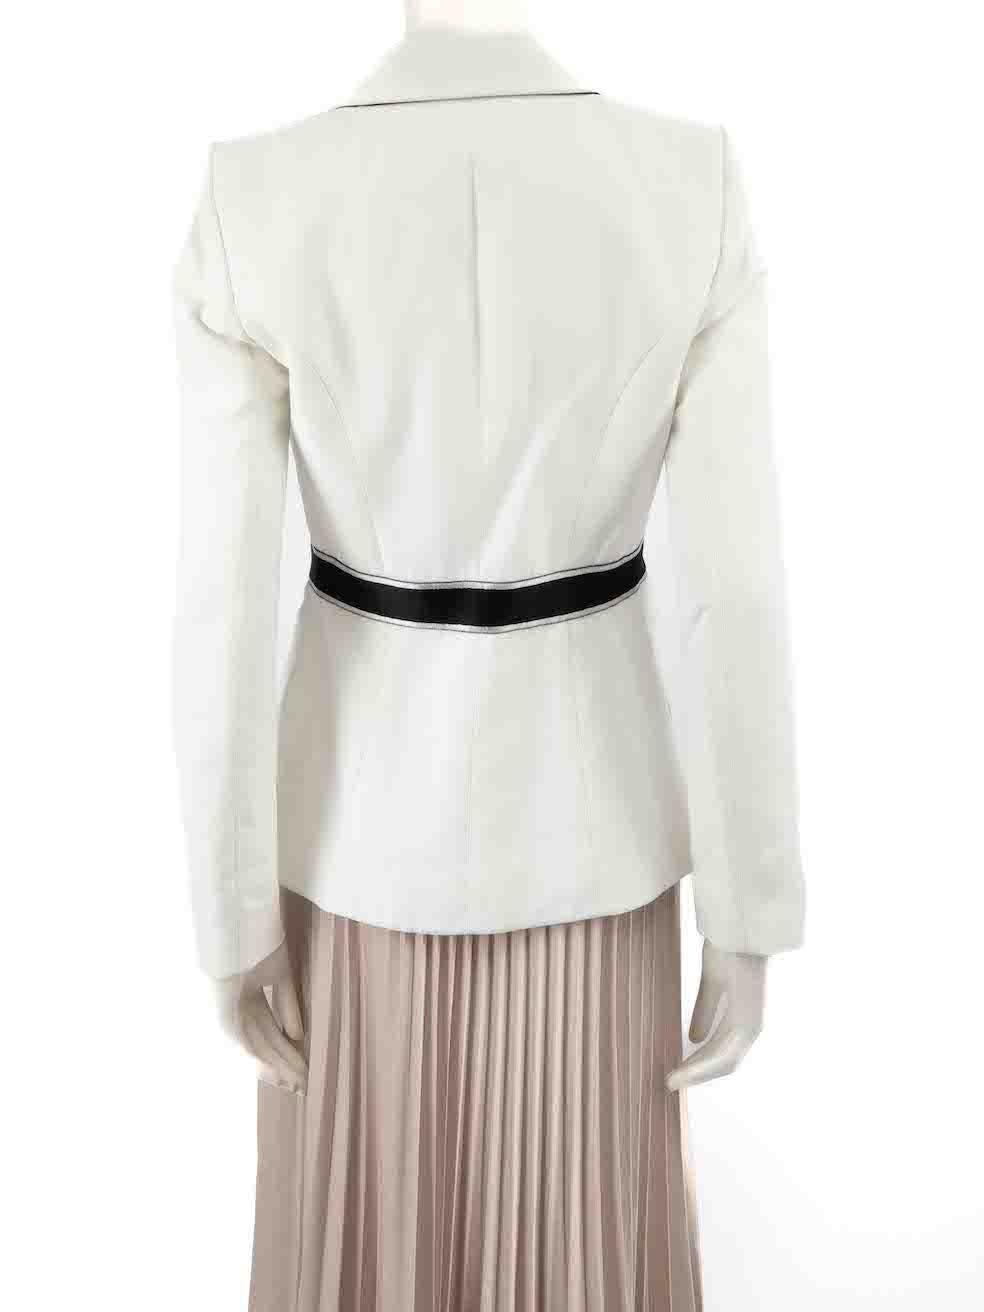 Amanda Wakeley White Contrast Lapel Blazer Size M In Good Condition For Sale In London, GB